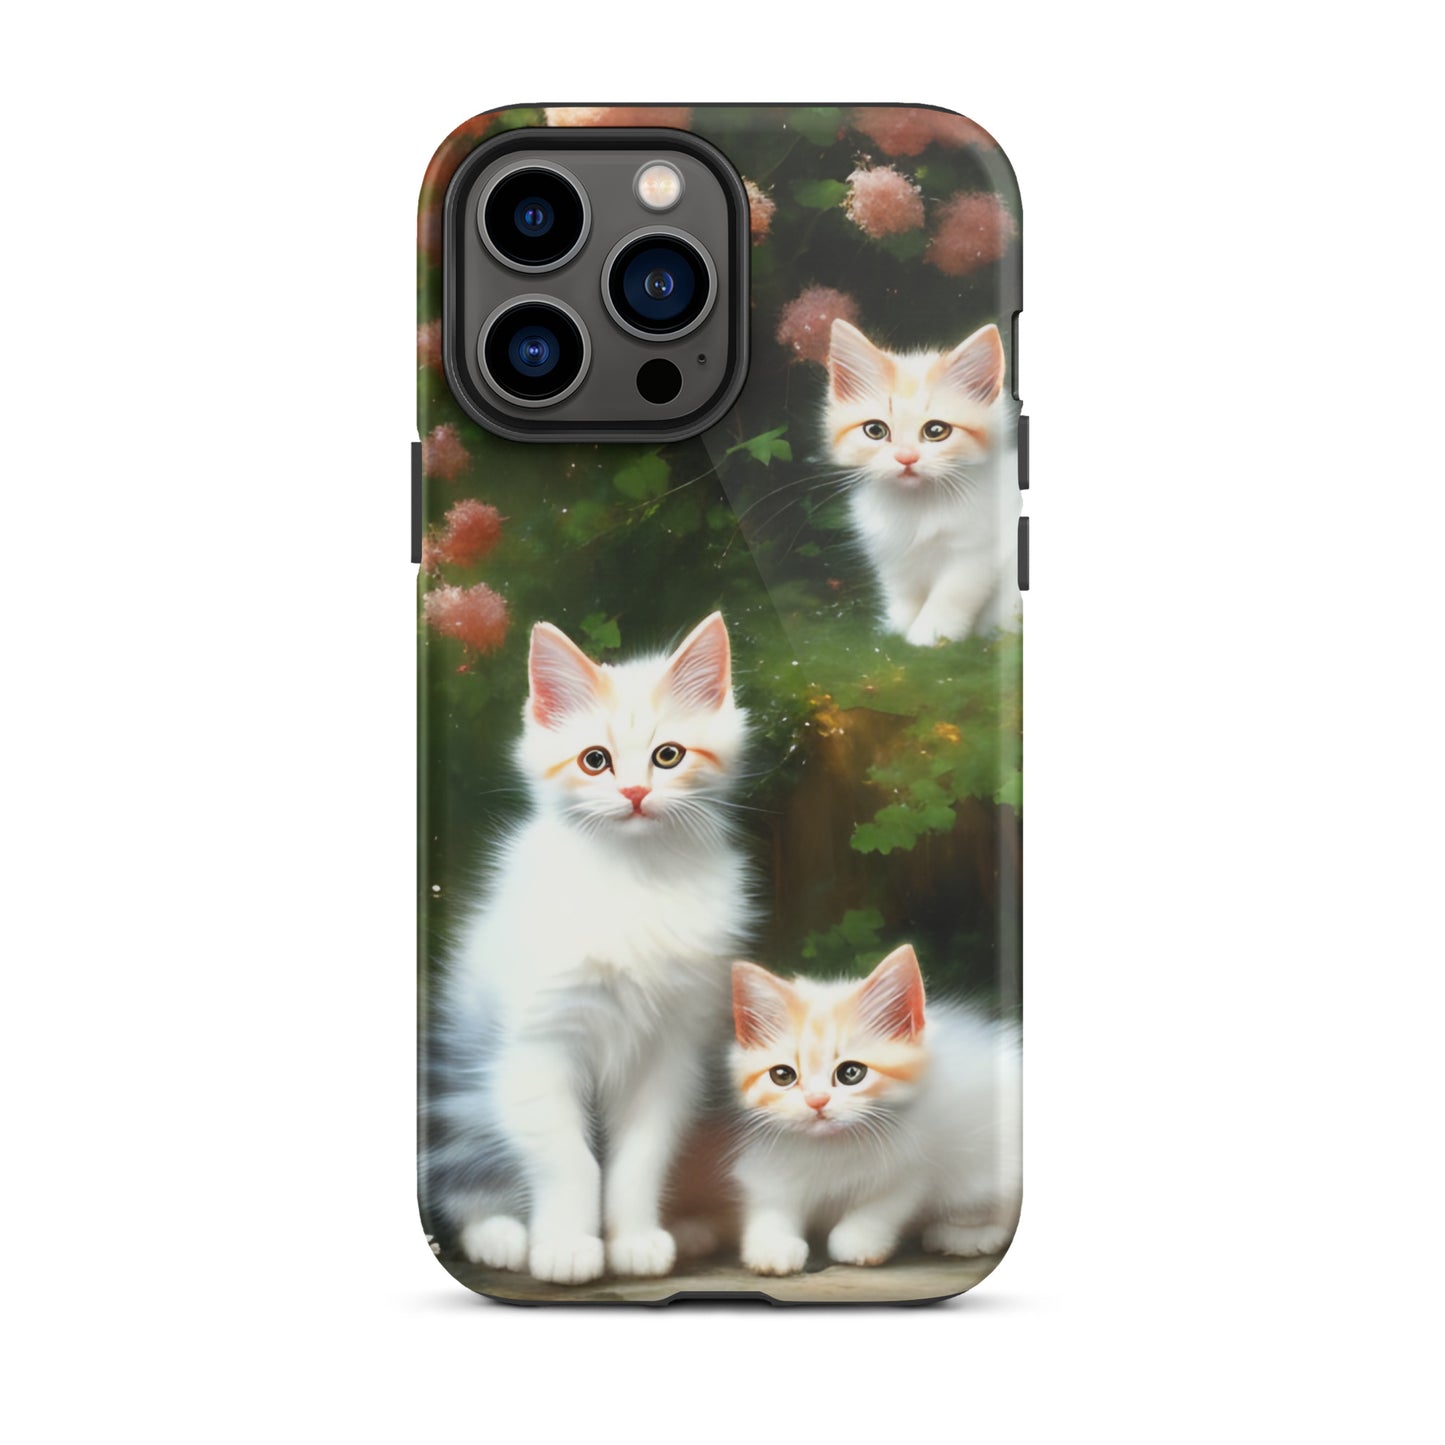 A picture of a iphone tough case with 3 fluffy white and orange kittens and peach colored flowers in the background - glossy-iphone-13-pro-max-front